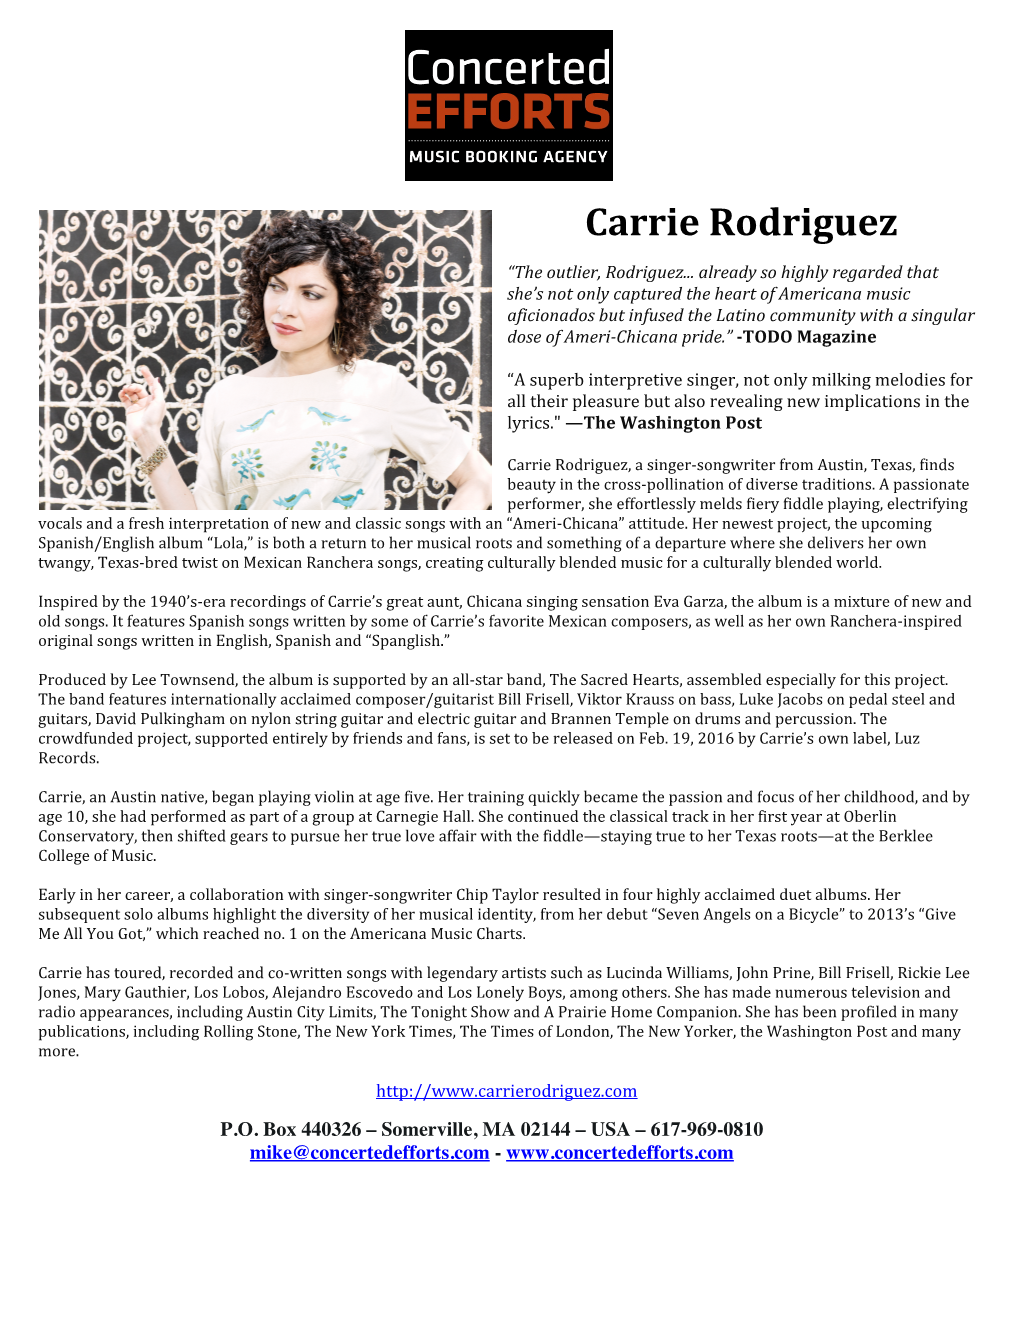 Carrie Rodriguez One Sheet